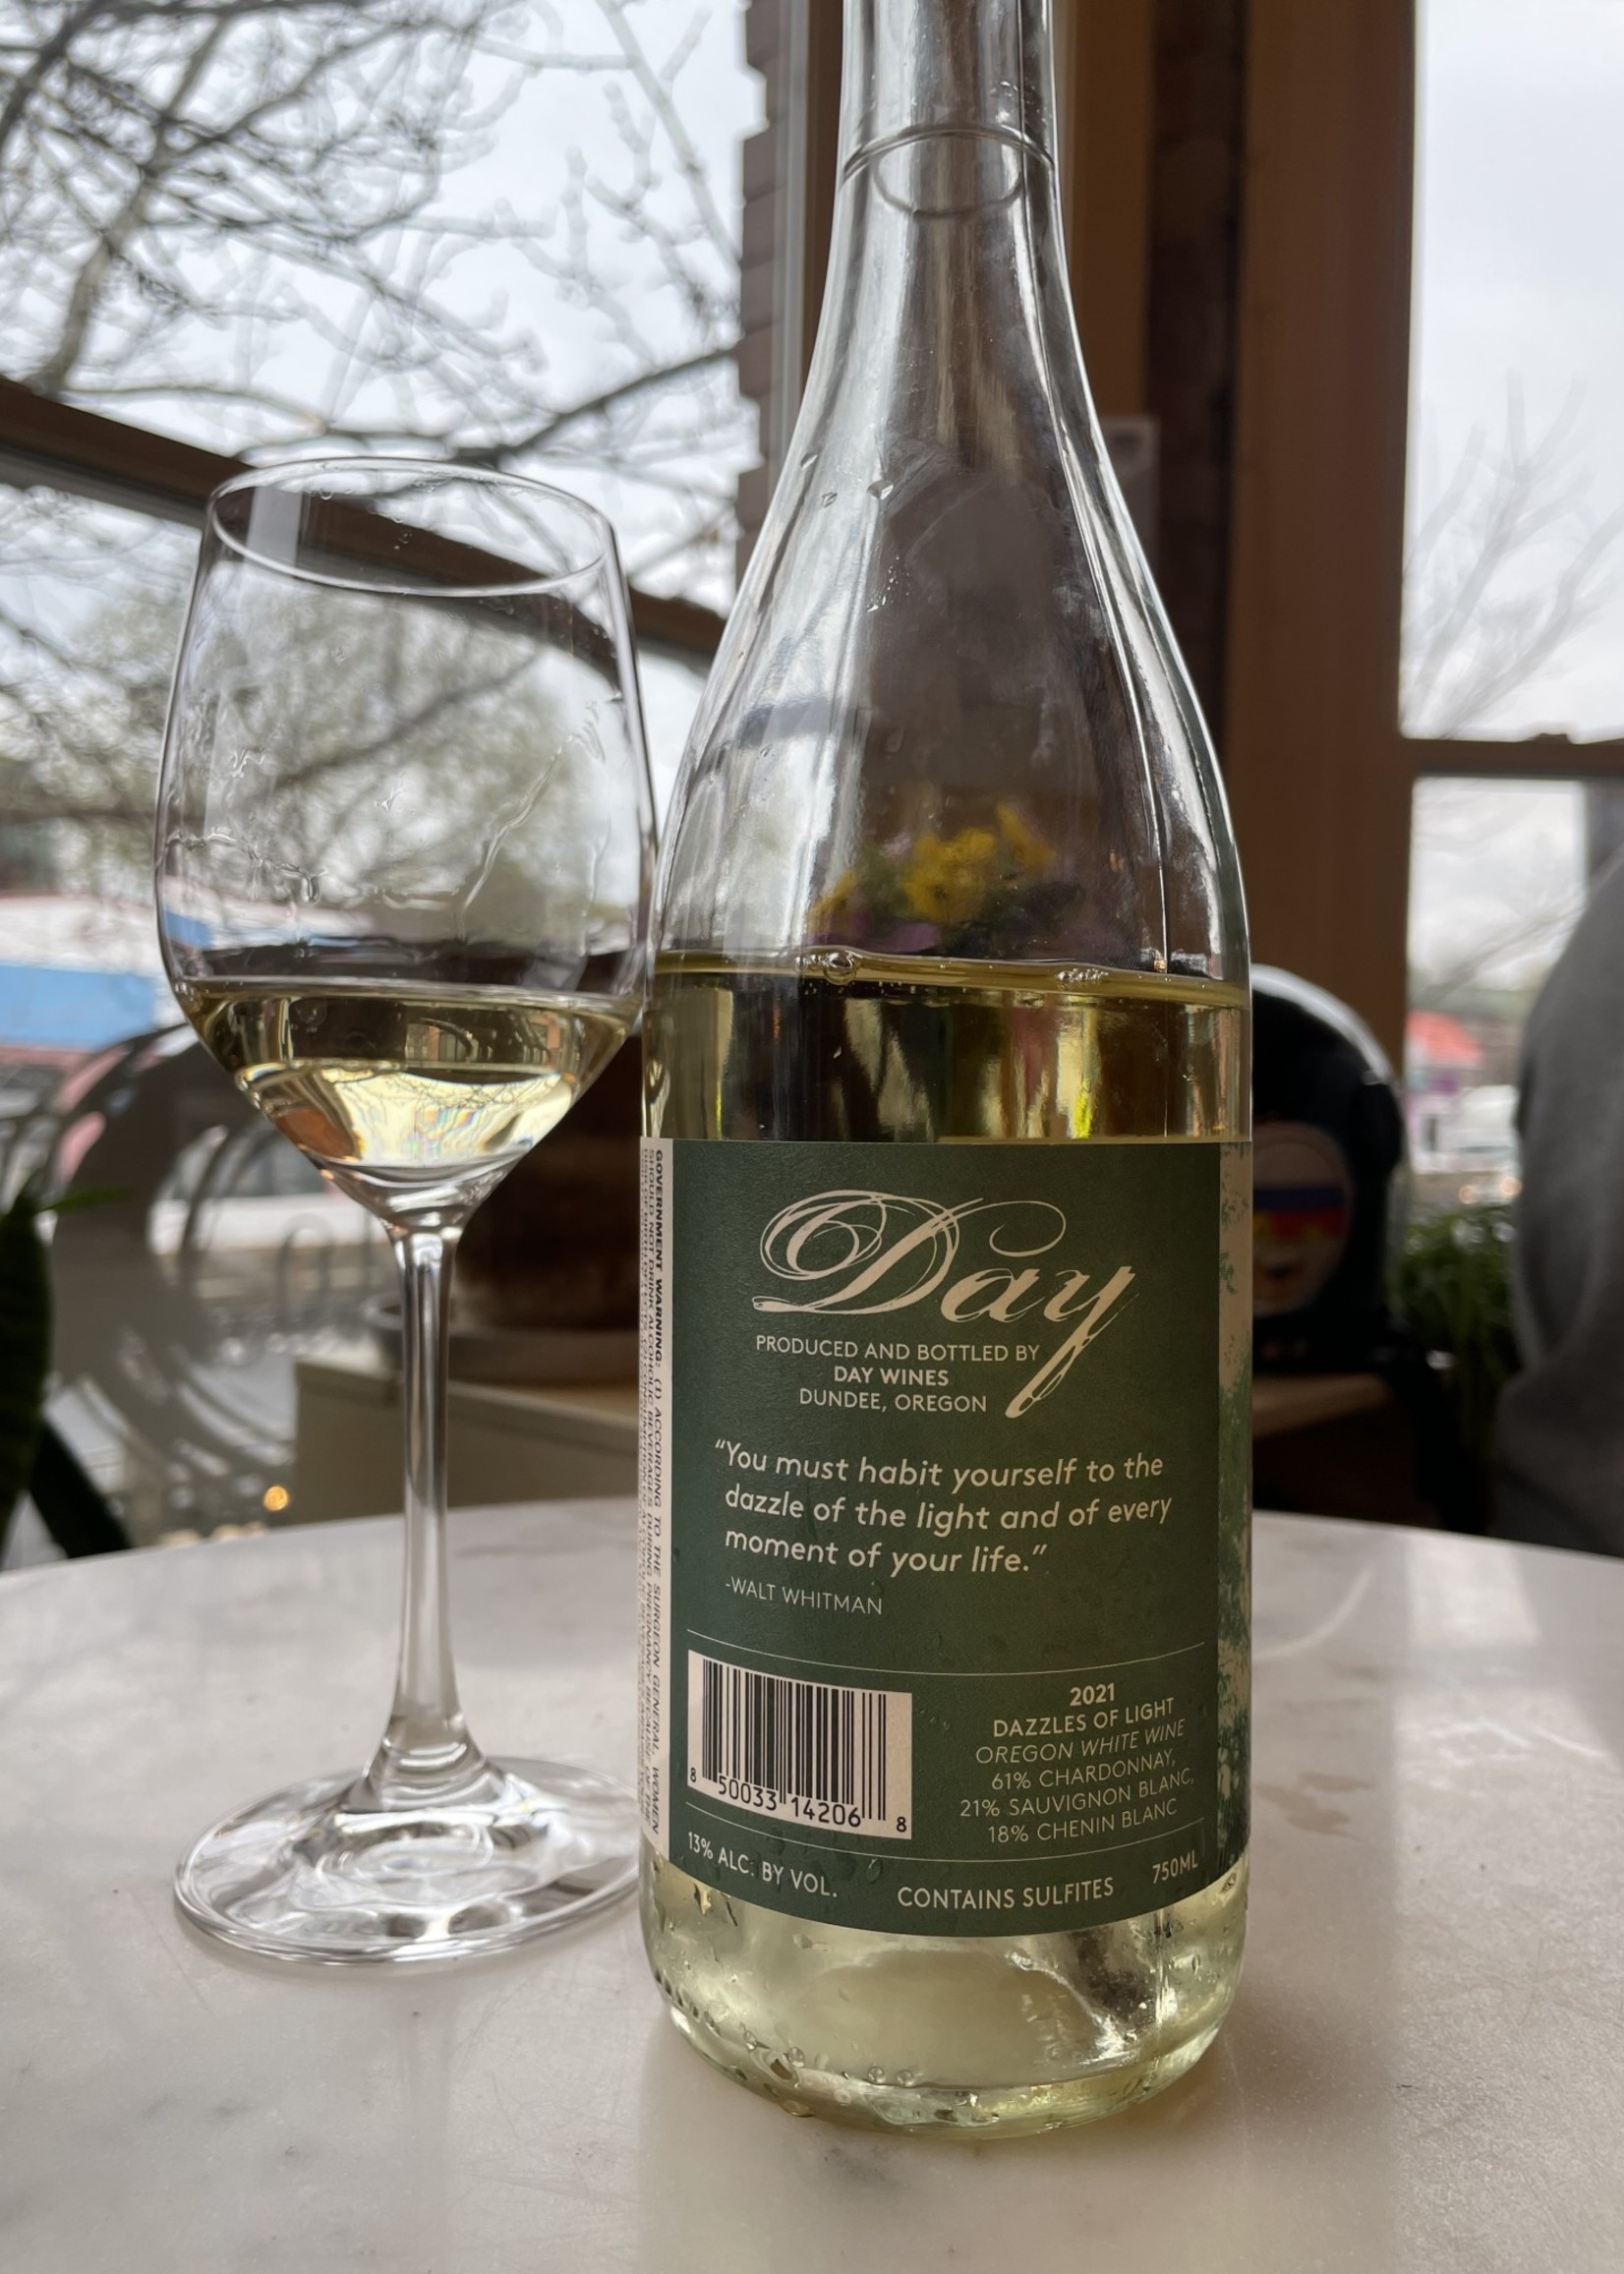 Brianne Day, Day Wines, Dazzles of Light, Willamette Valley, Oregon 2021